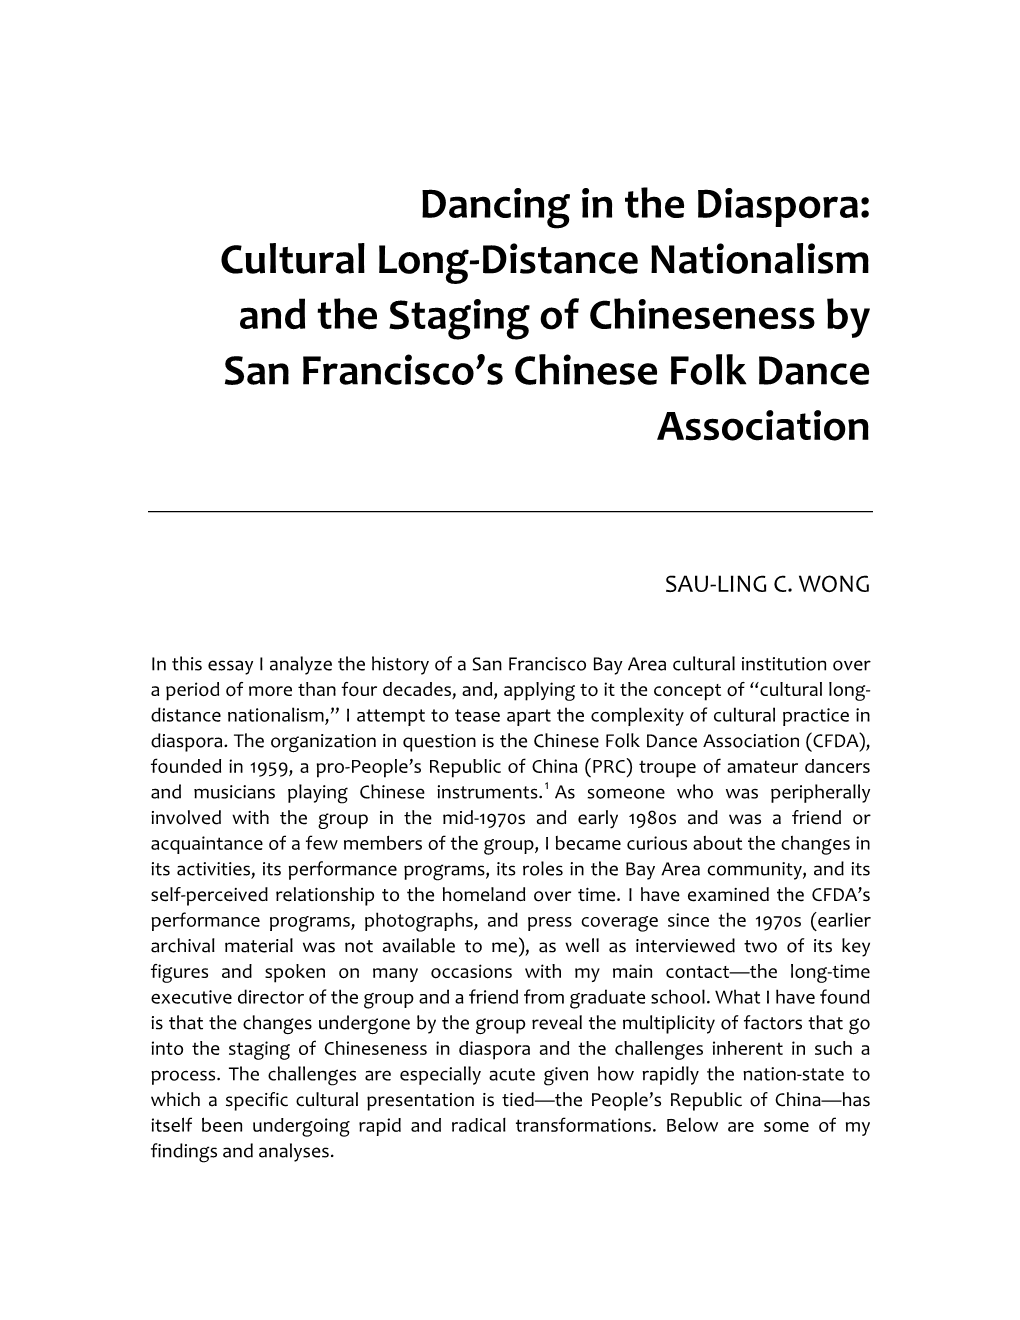 Dancing in the Diaspora: Cultural Long-Distance Nationalism and The